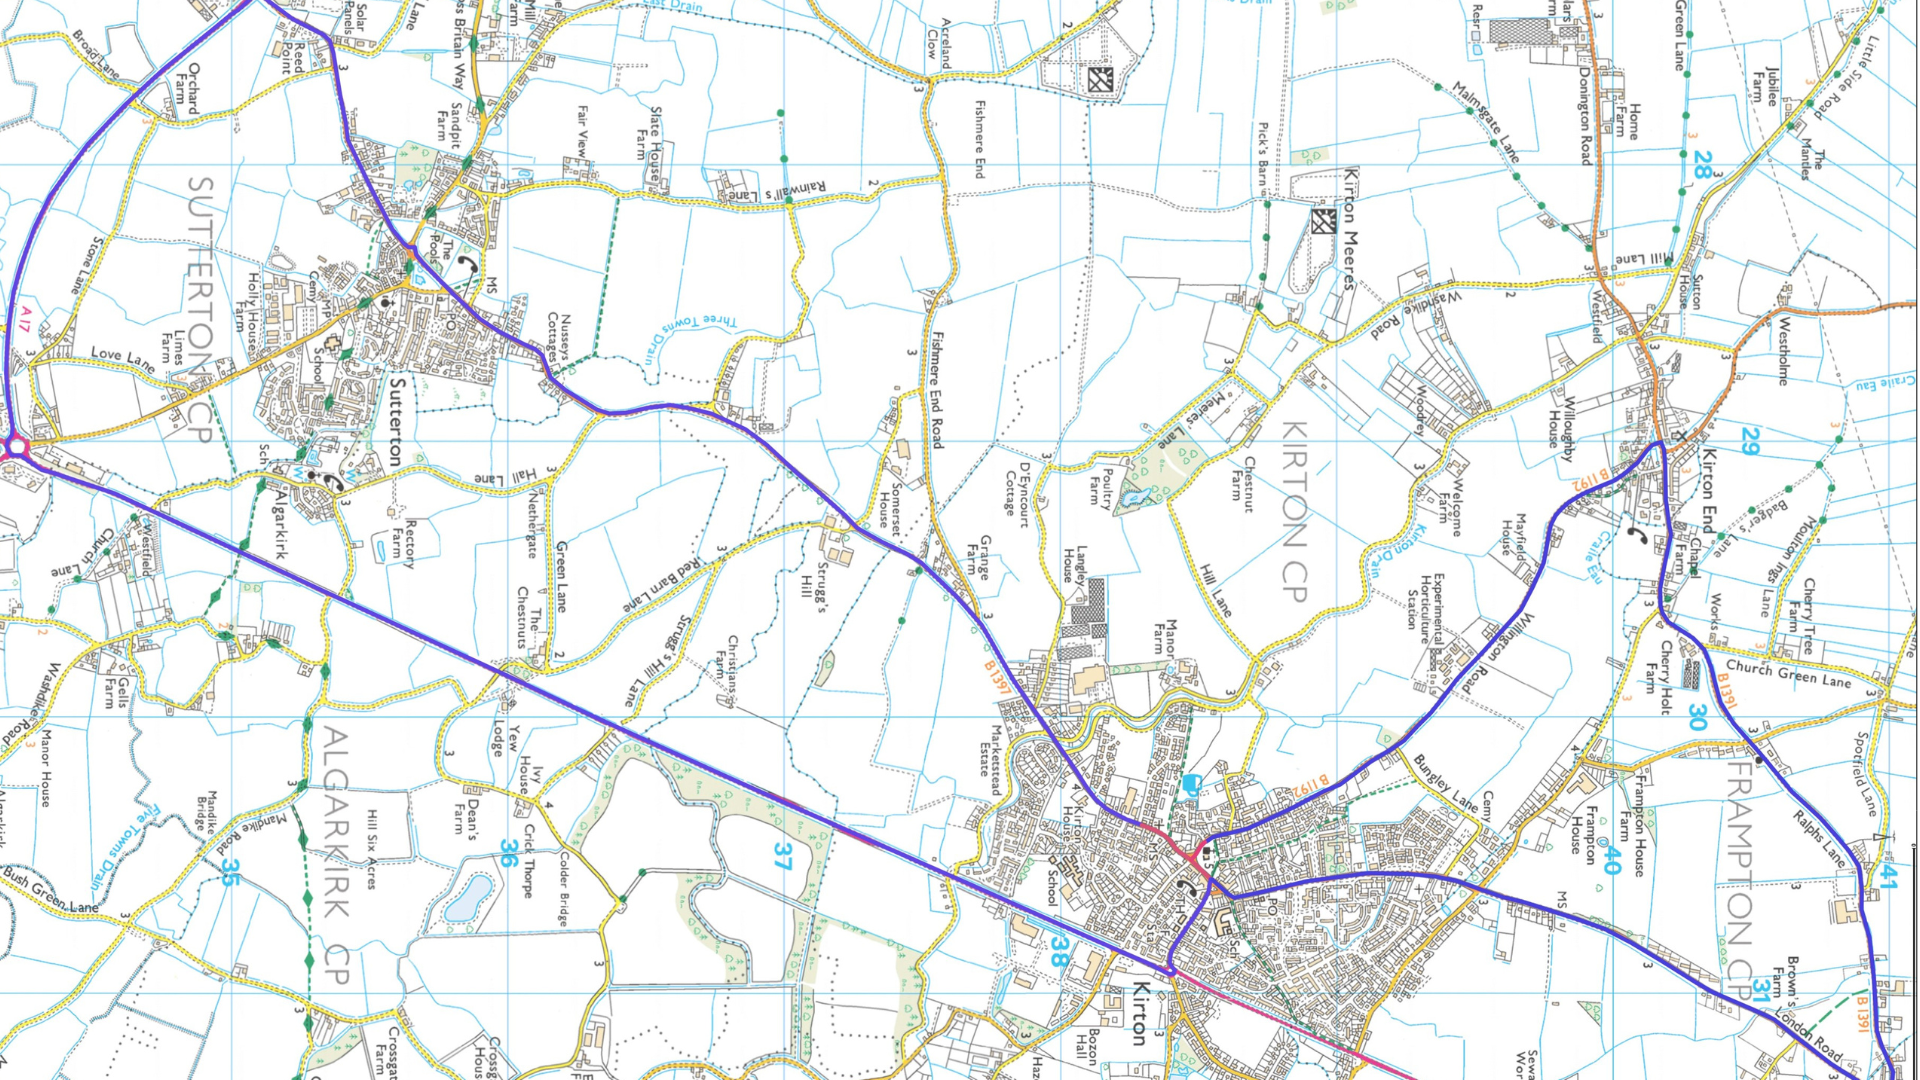 The diversion route for the works